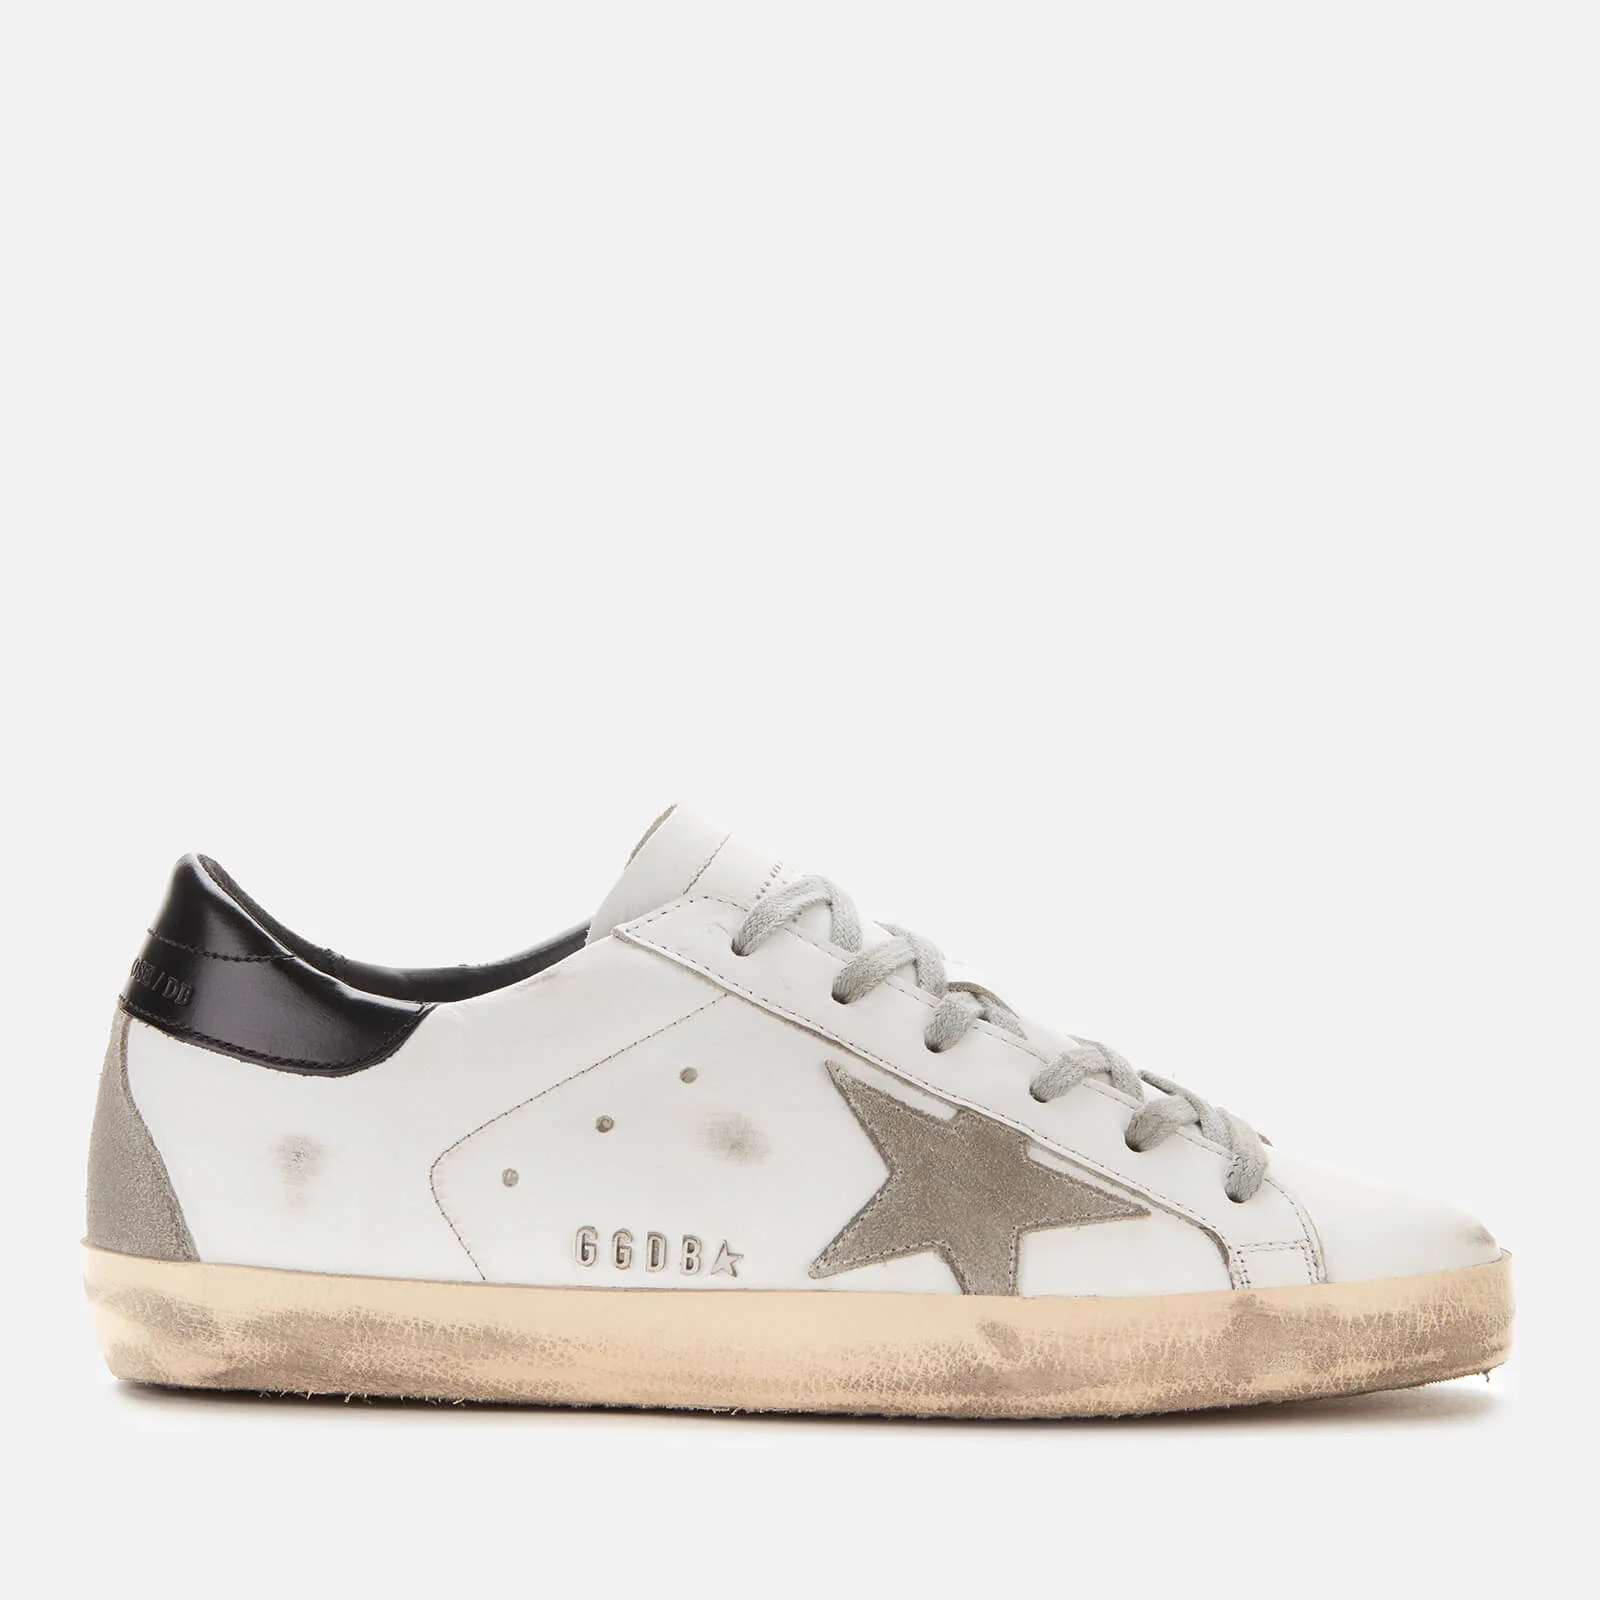 Golden Goose Women's Superstar Leather Trainers - White/Black/Cream/Metal Lettering Image 1